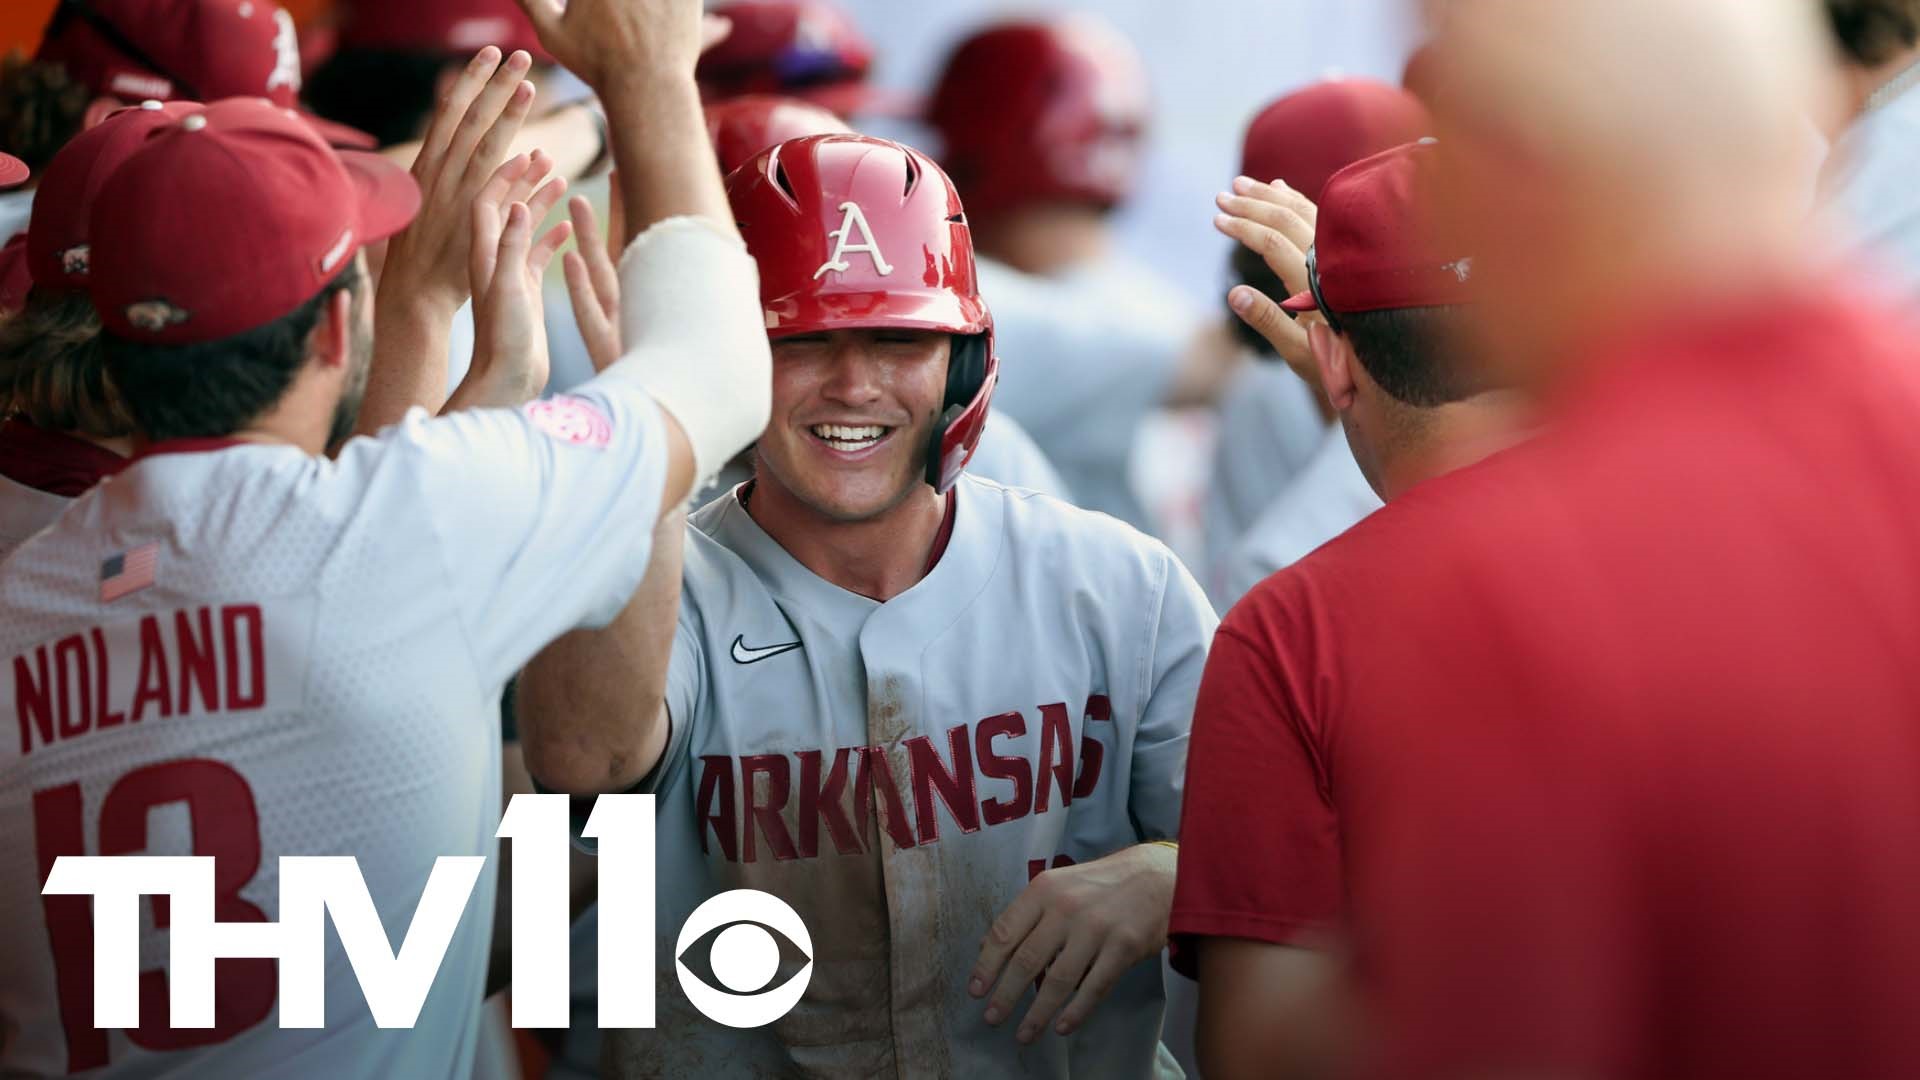 The Diamond Hogs are all set to start their College World Series run. Ahead of their game, we hear from the family of one of the most crucial Hogs on the team.